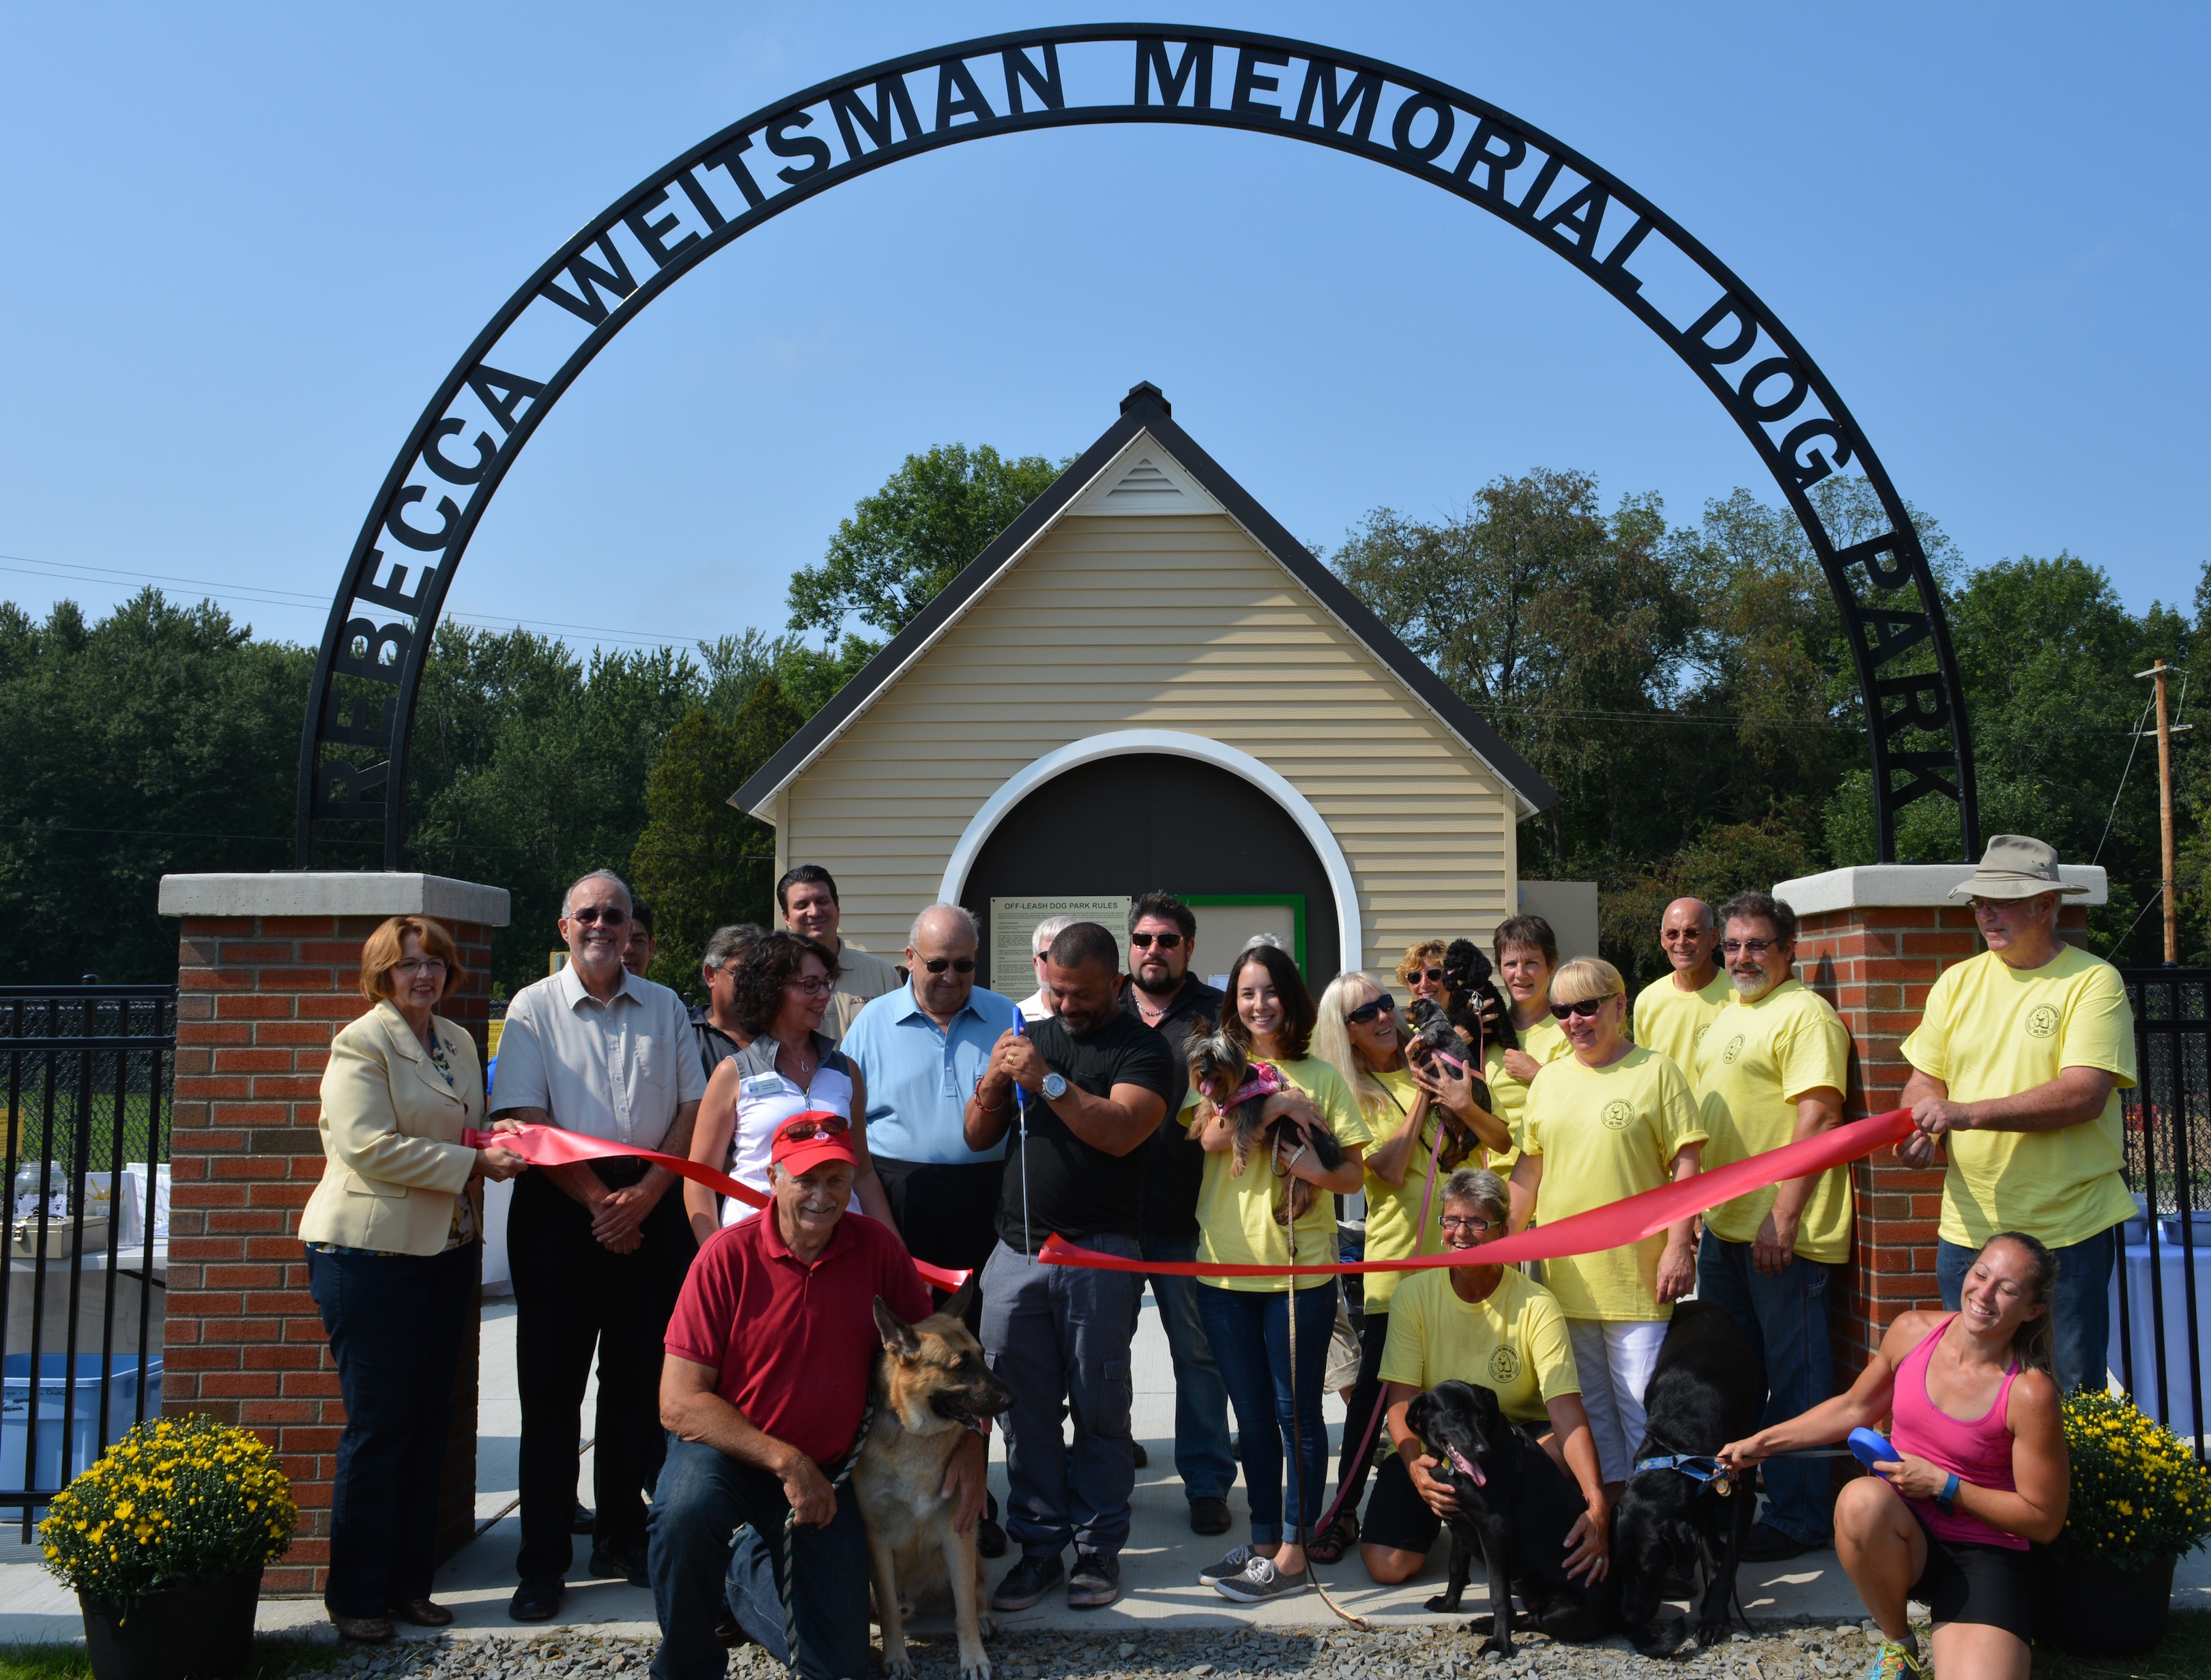 Rebecca Weitsman Memorial Dog Park officially opens in Hickories Park